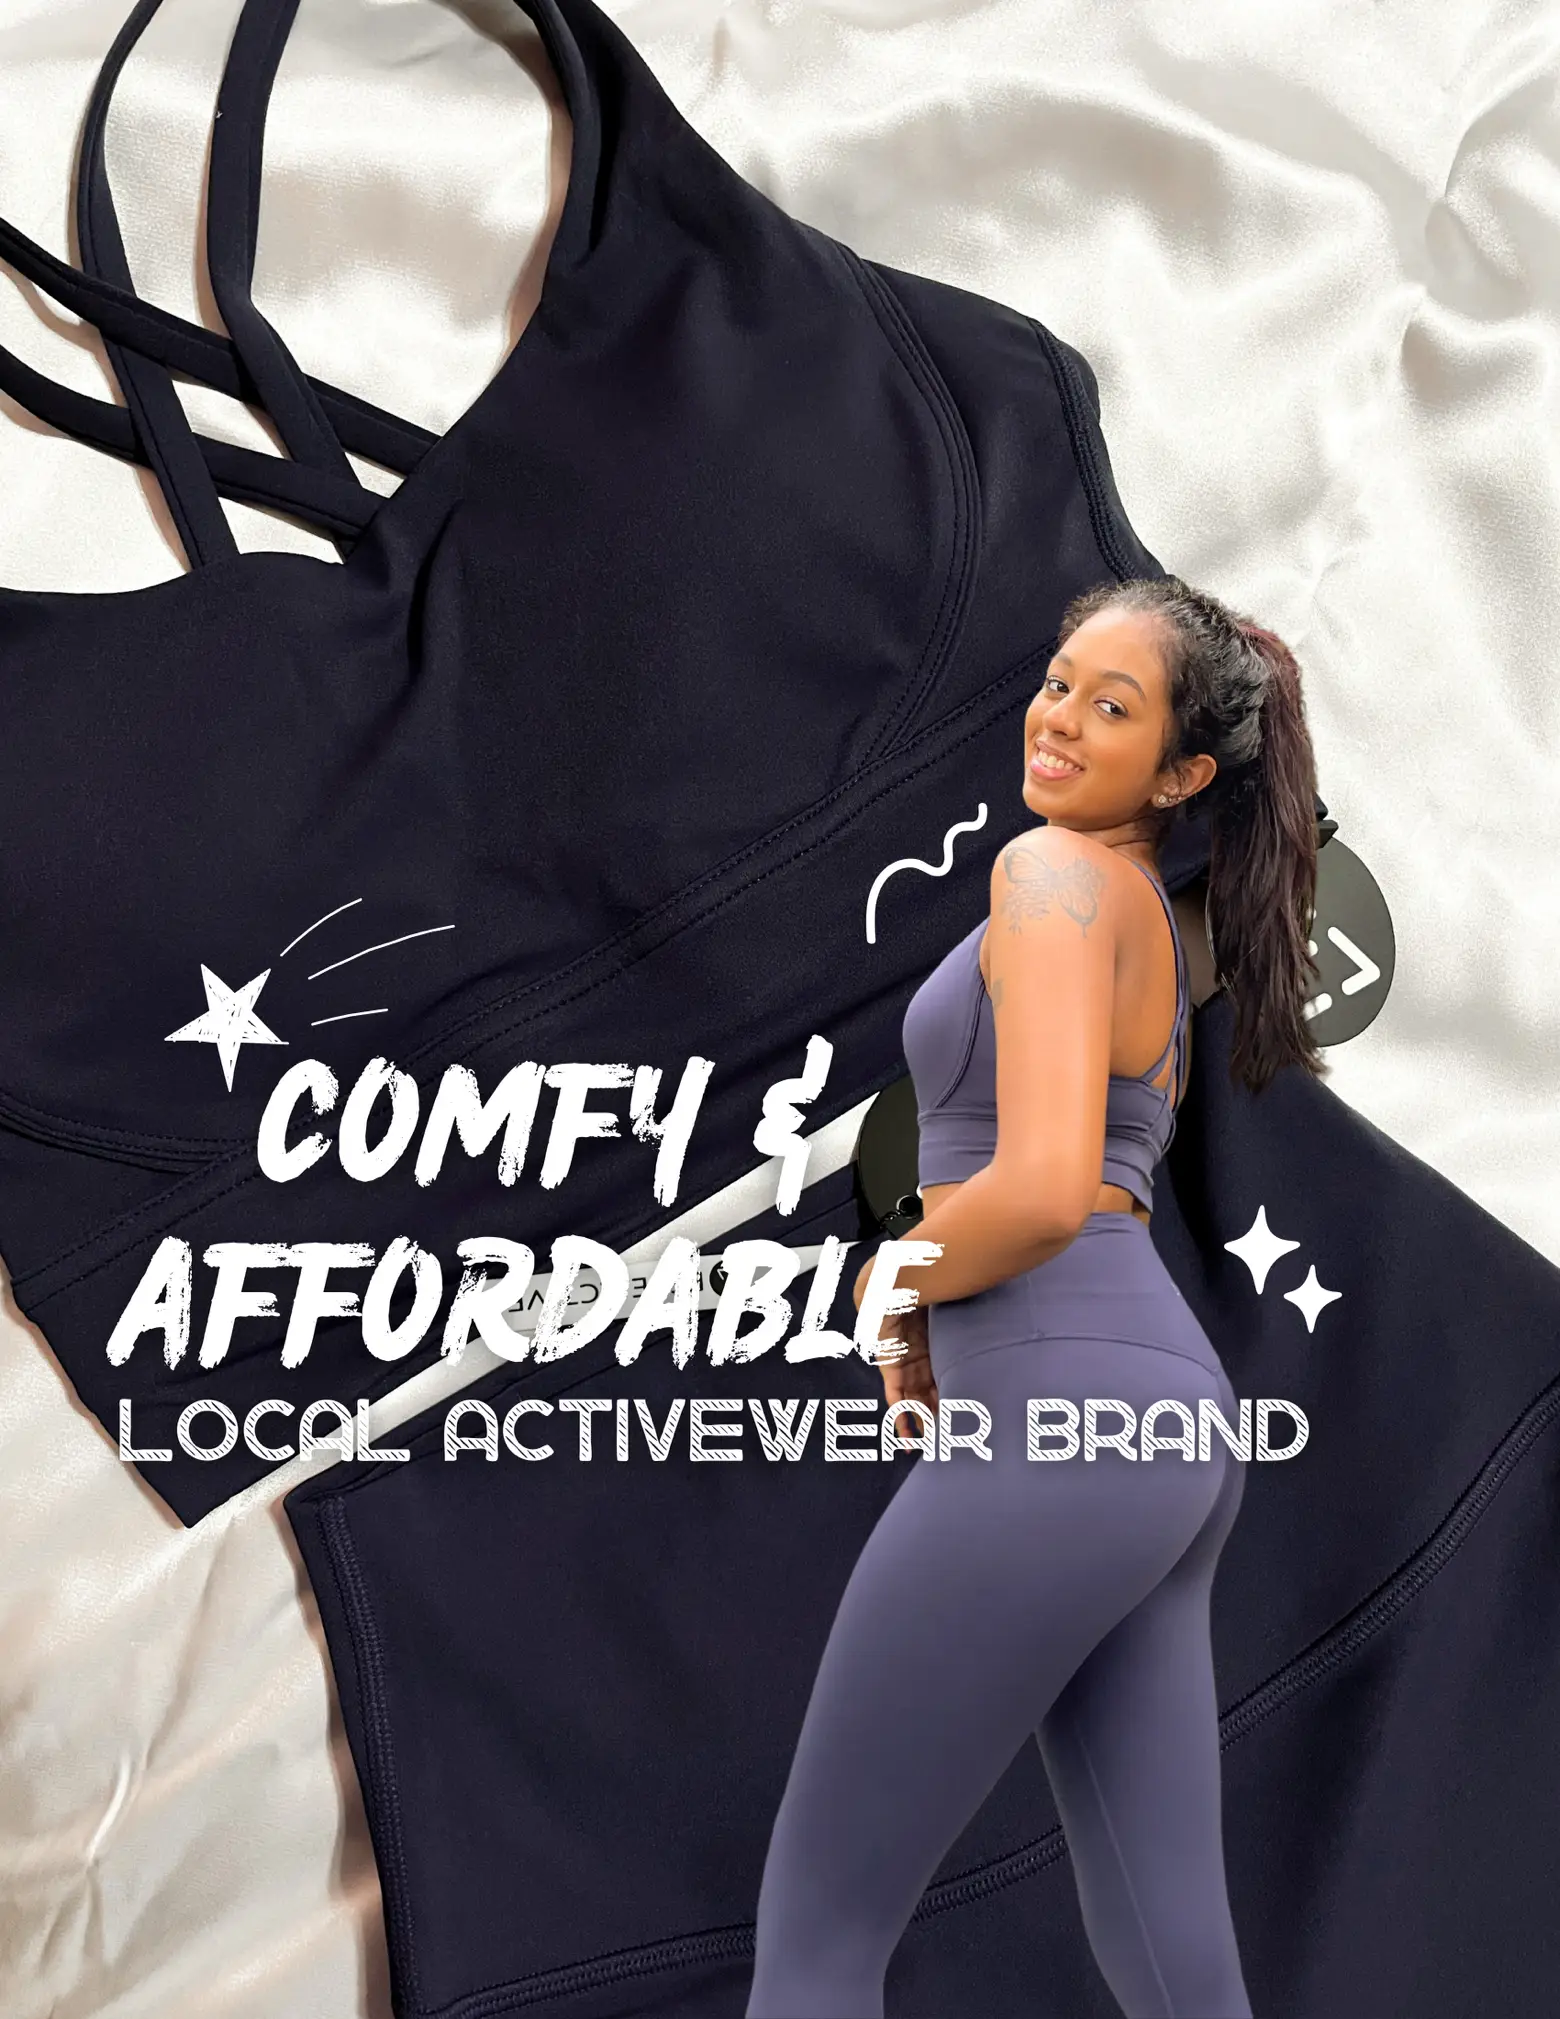 comfy activewear outfits - Lemon8 Search